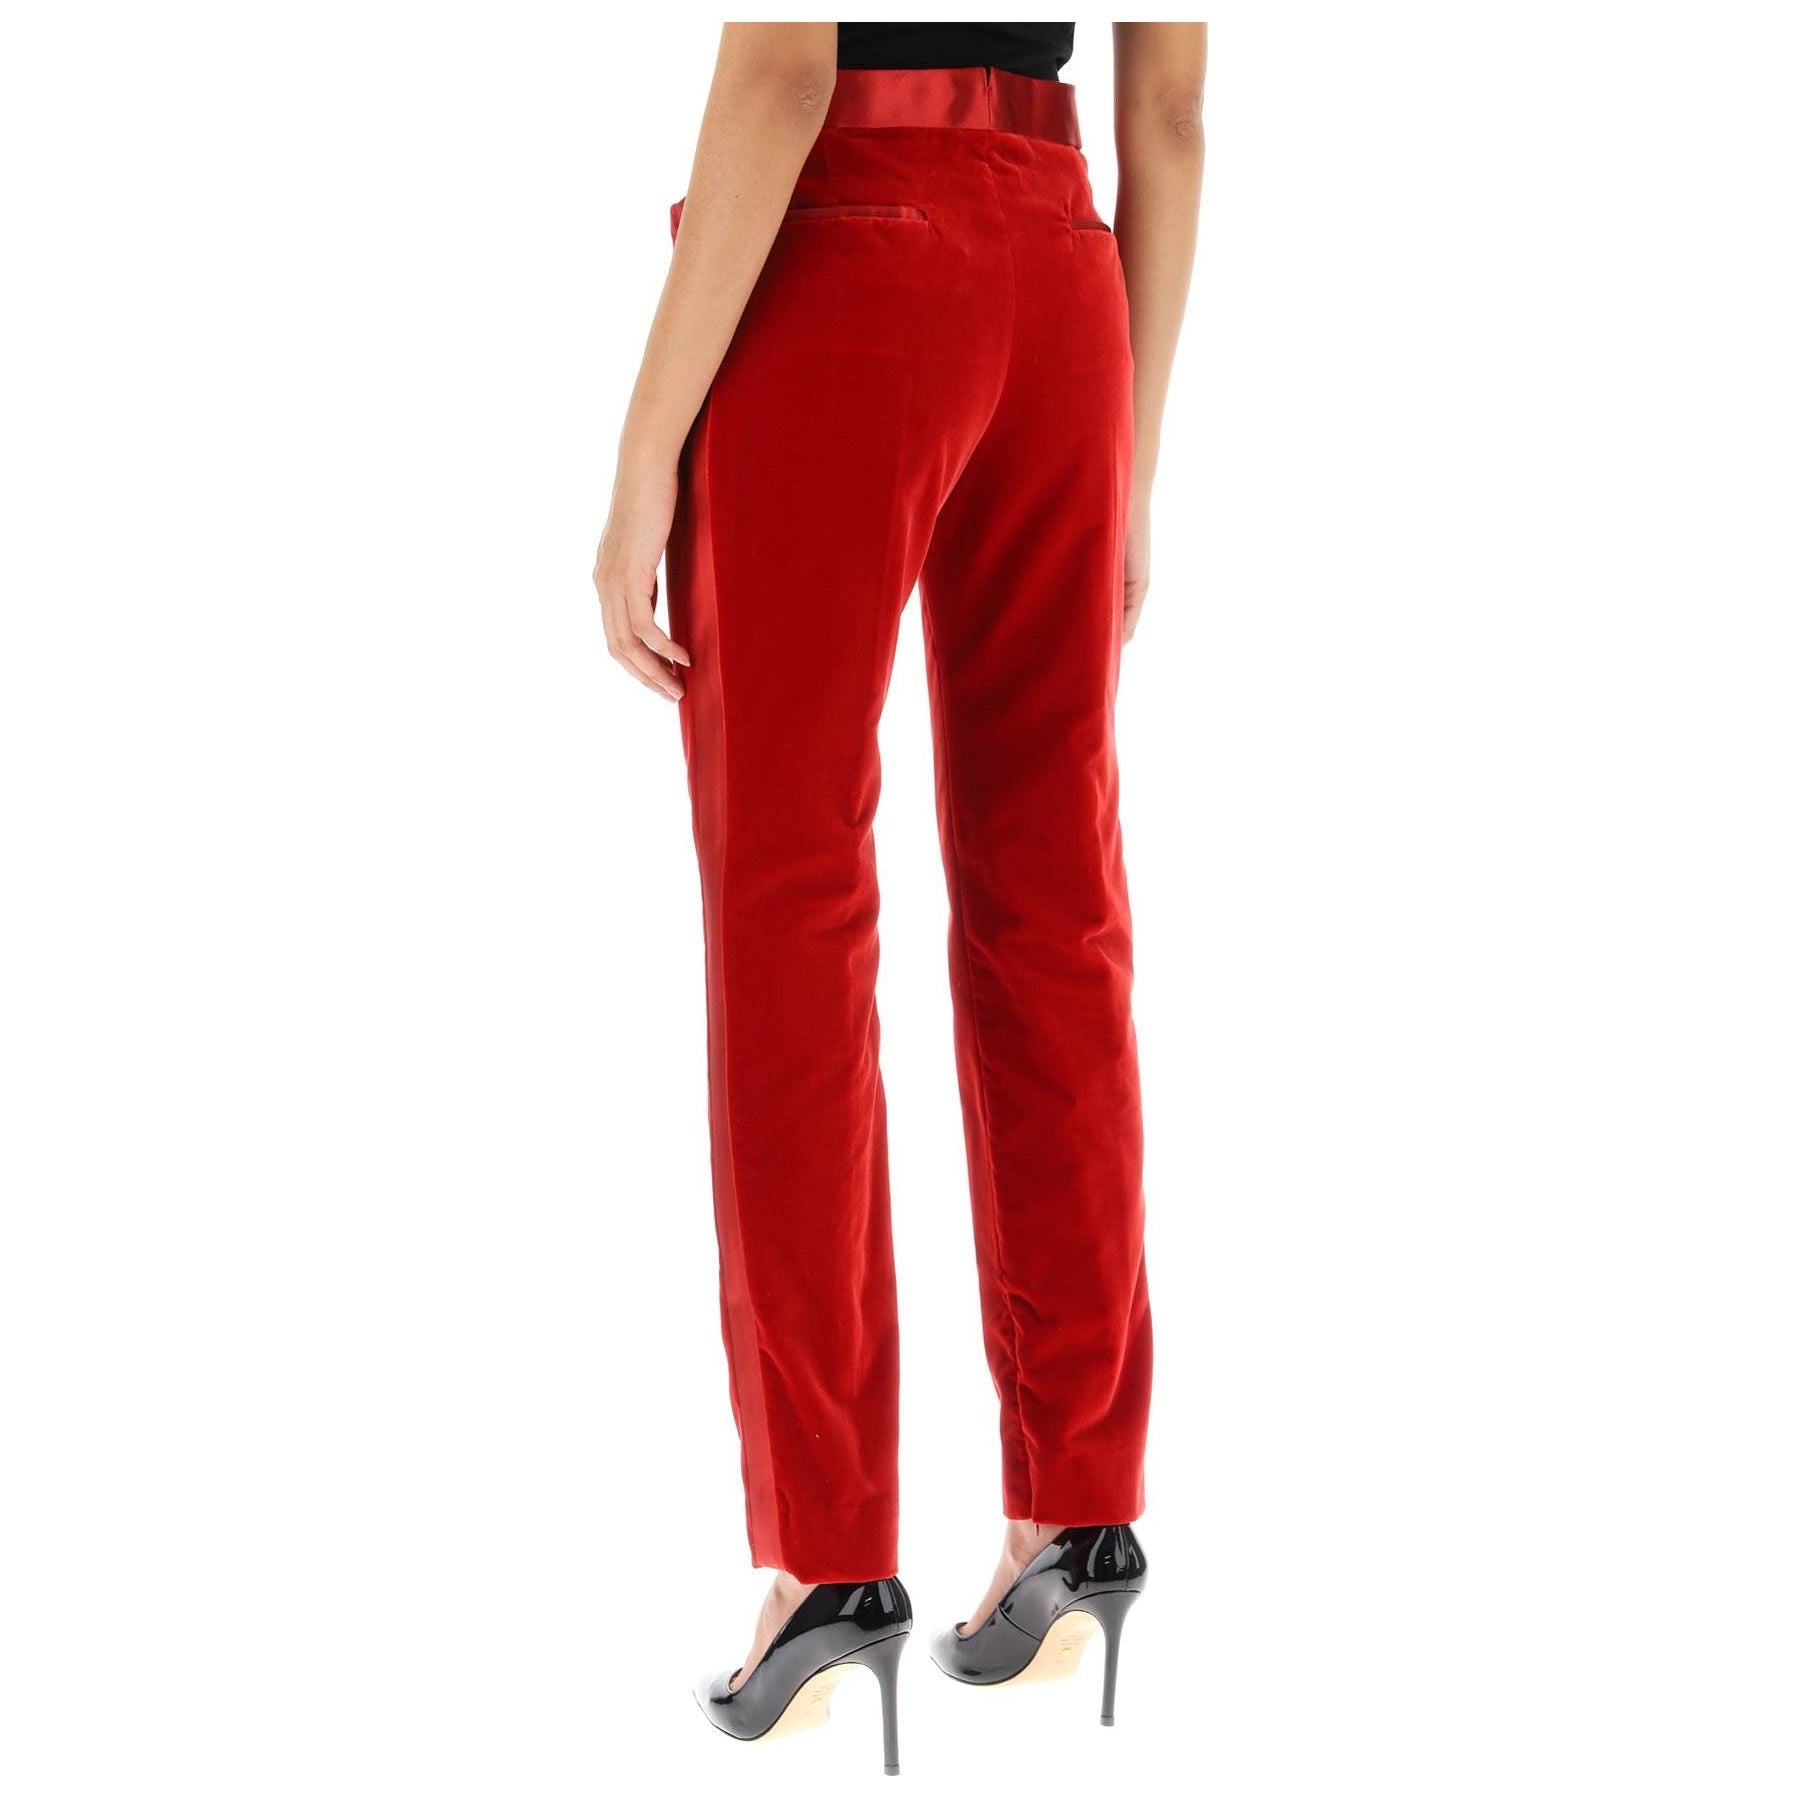 Velvet Pants With Satin Bands